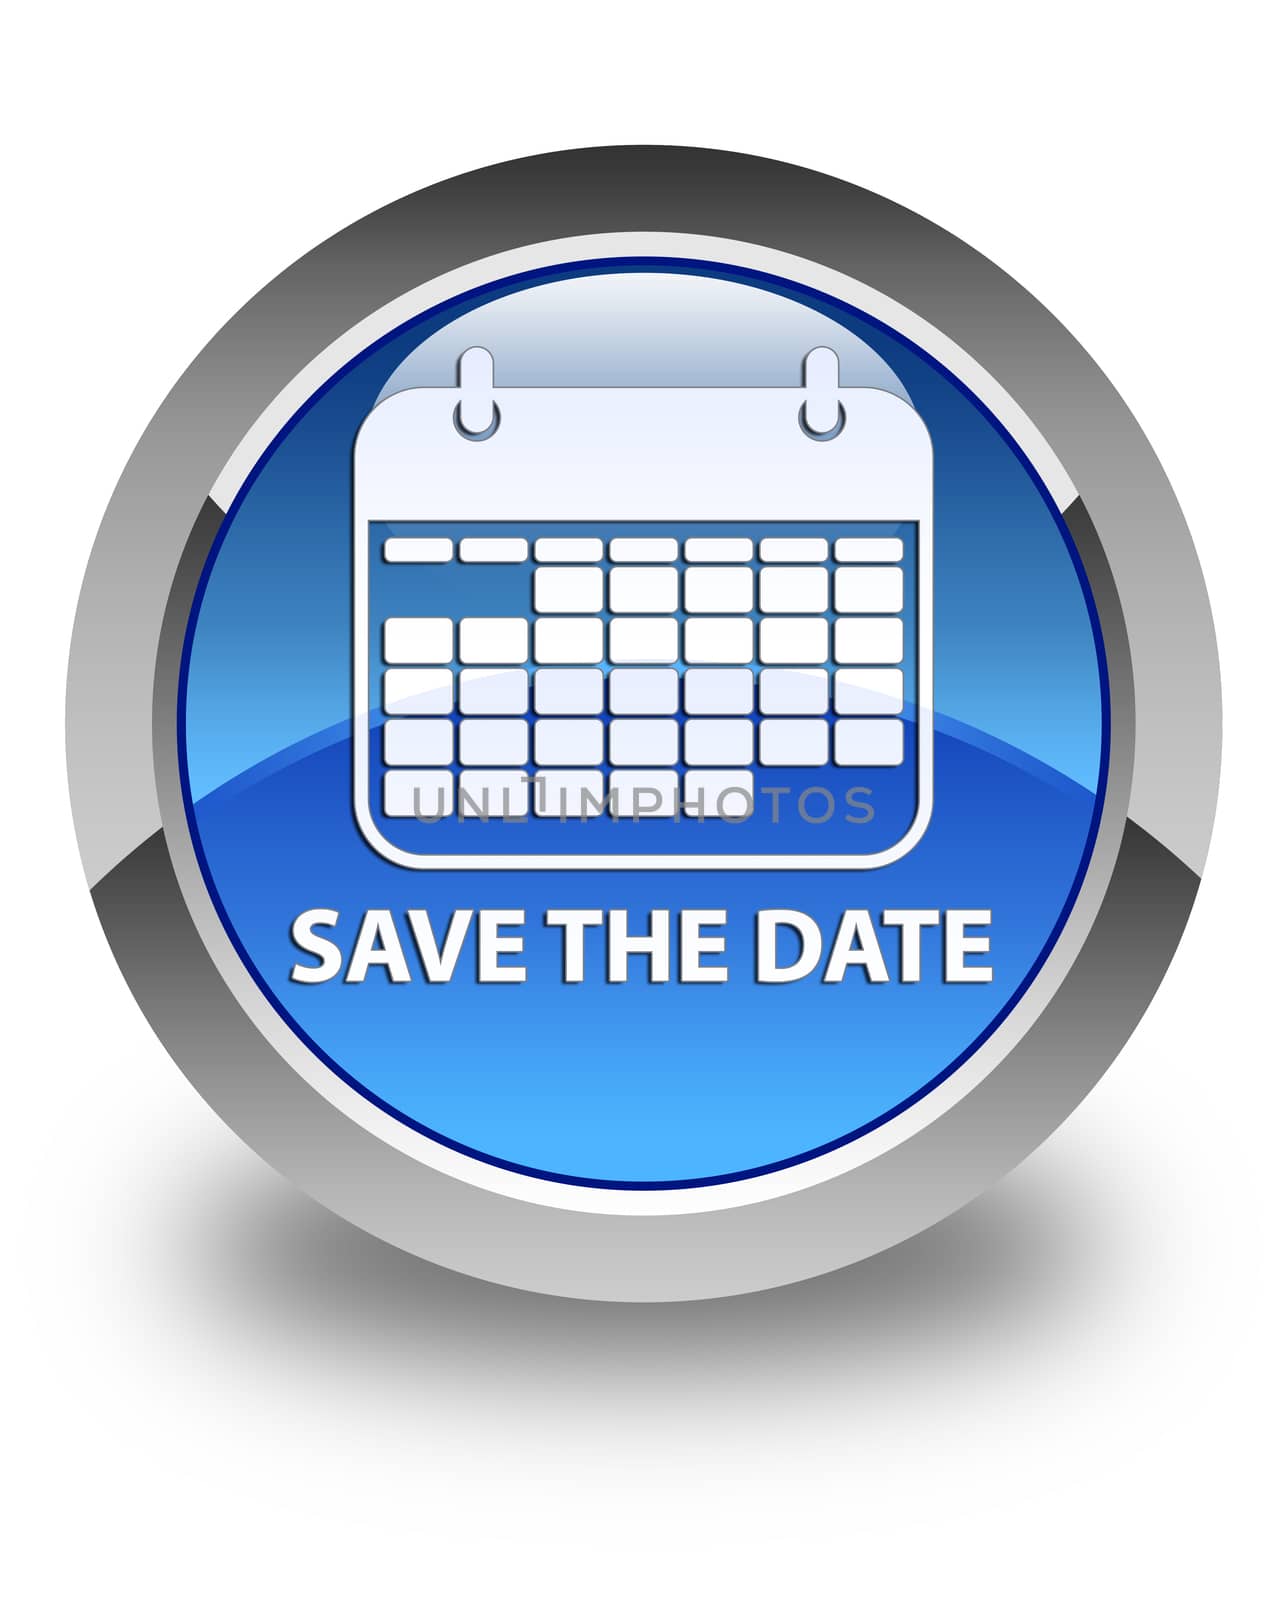 Save the date glossy blue round button